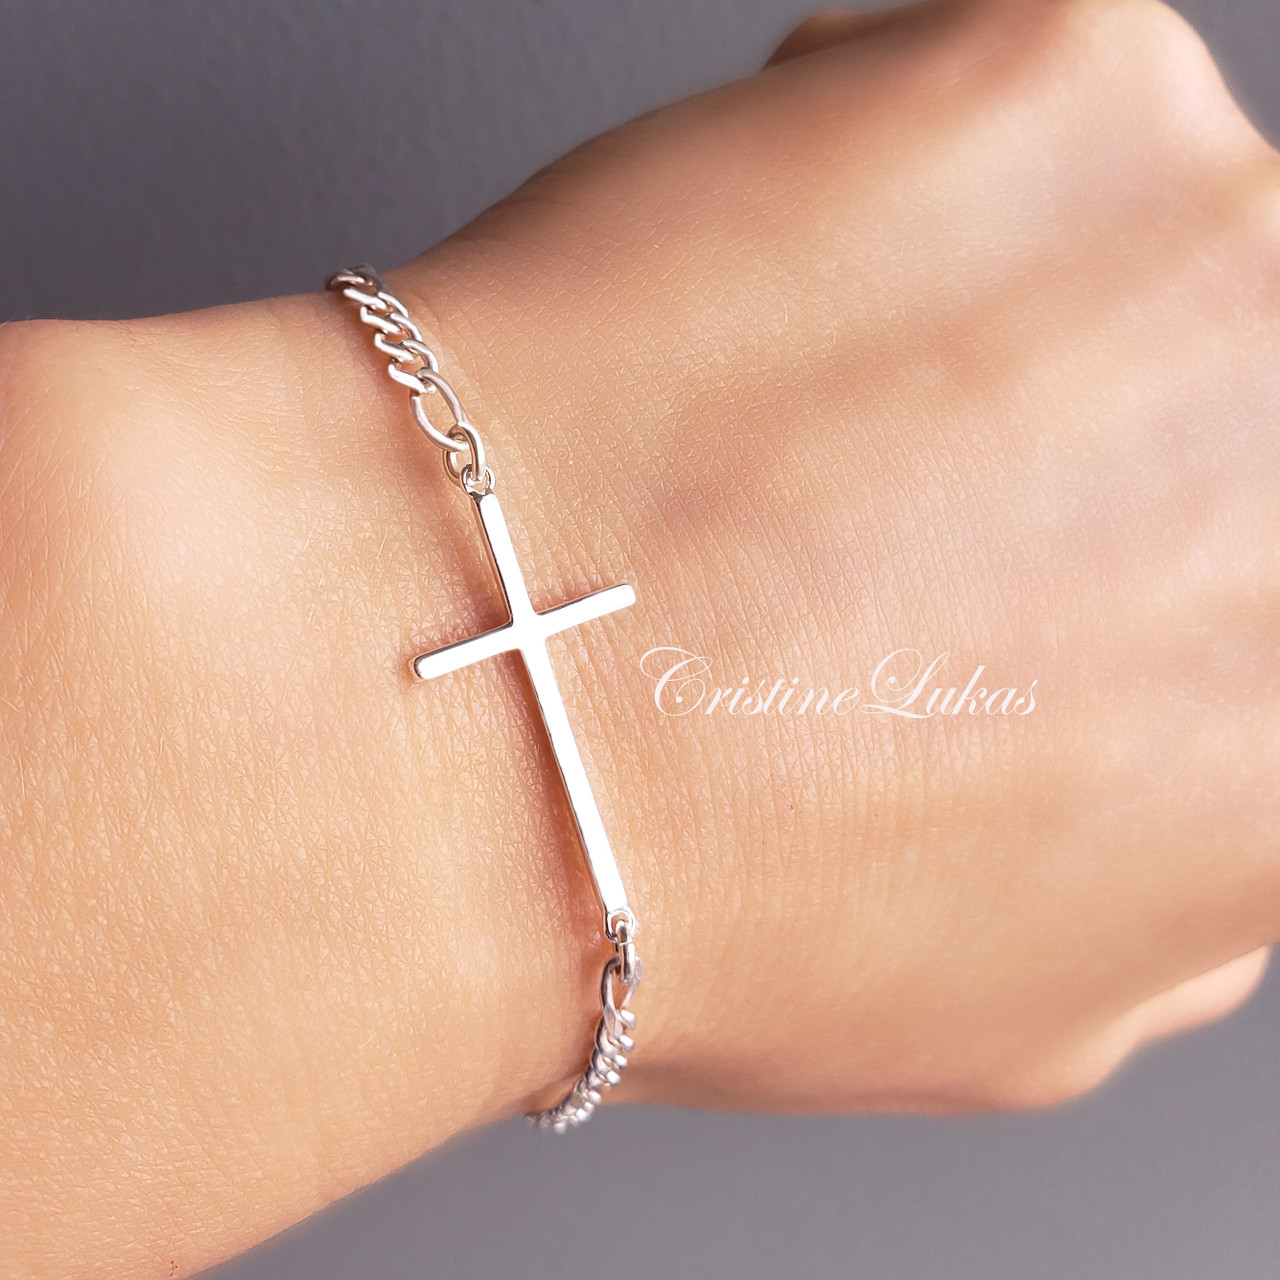 Personalized Baby Stainless Steel ID Bracelet With Cross 14k Gold Plated,  Customized Nameplated Baptism Children Newborn Gift